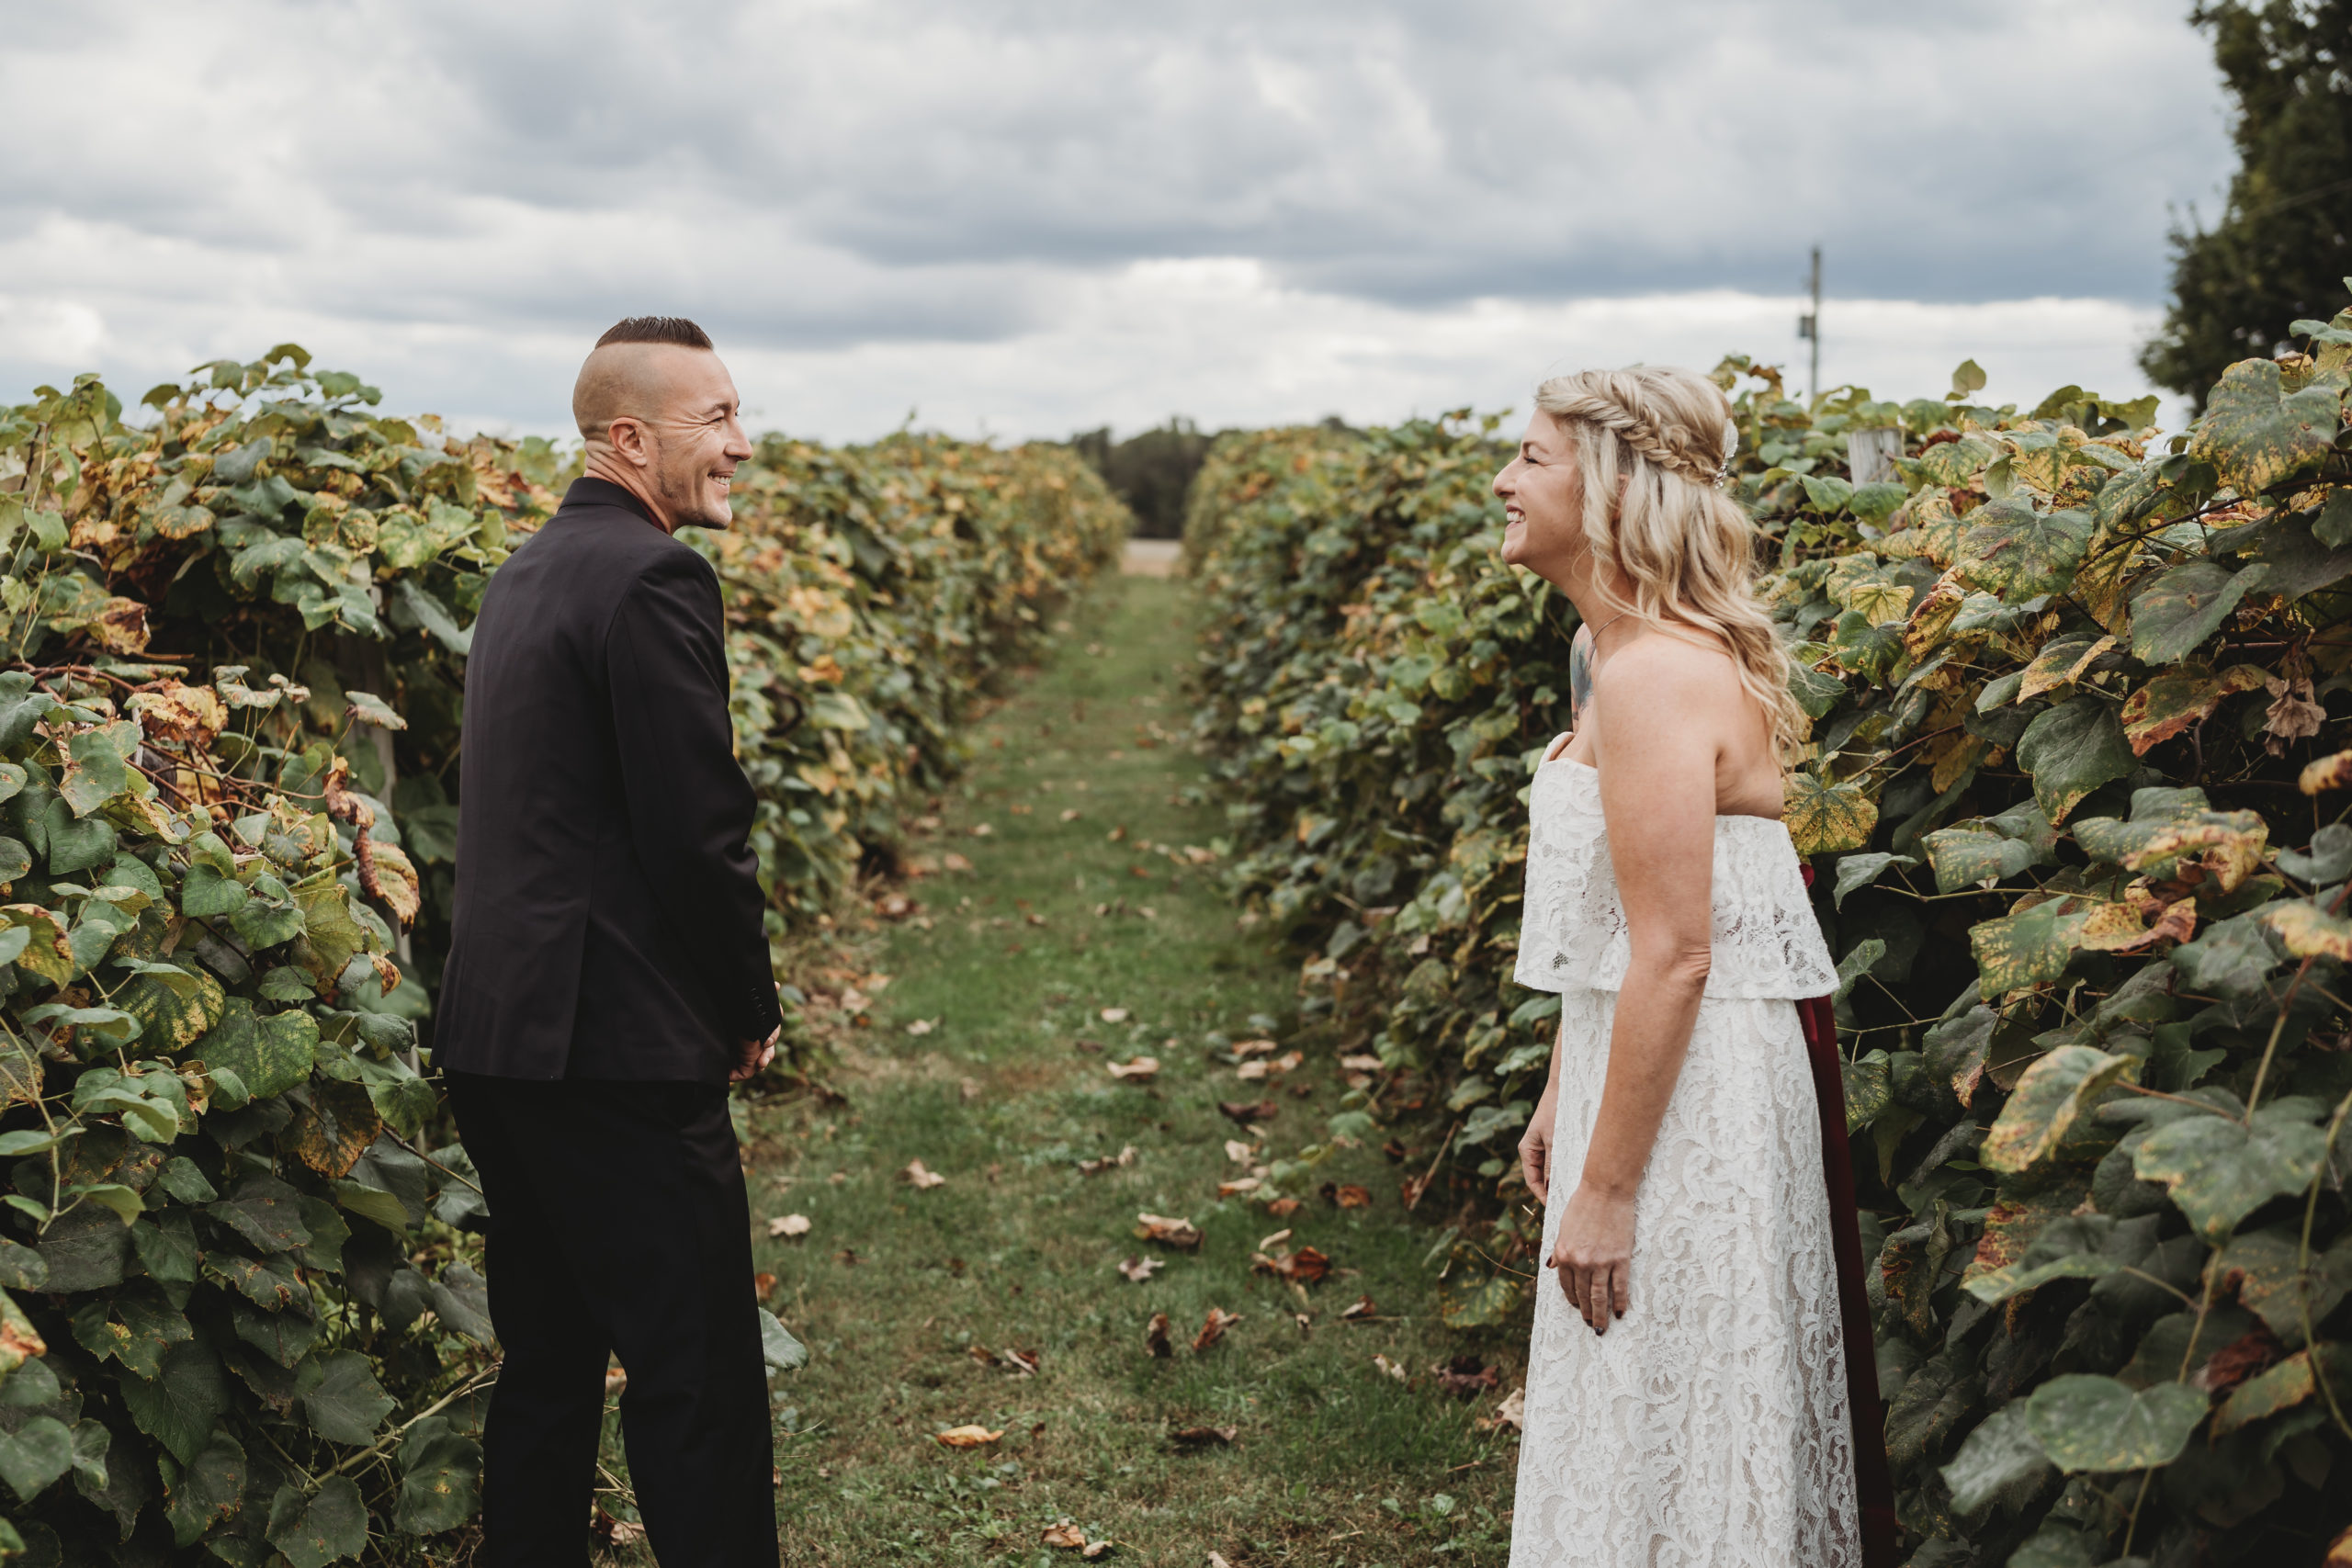 Groom and bride share their first look in a row of grape vines at a winery